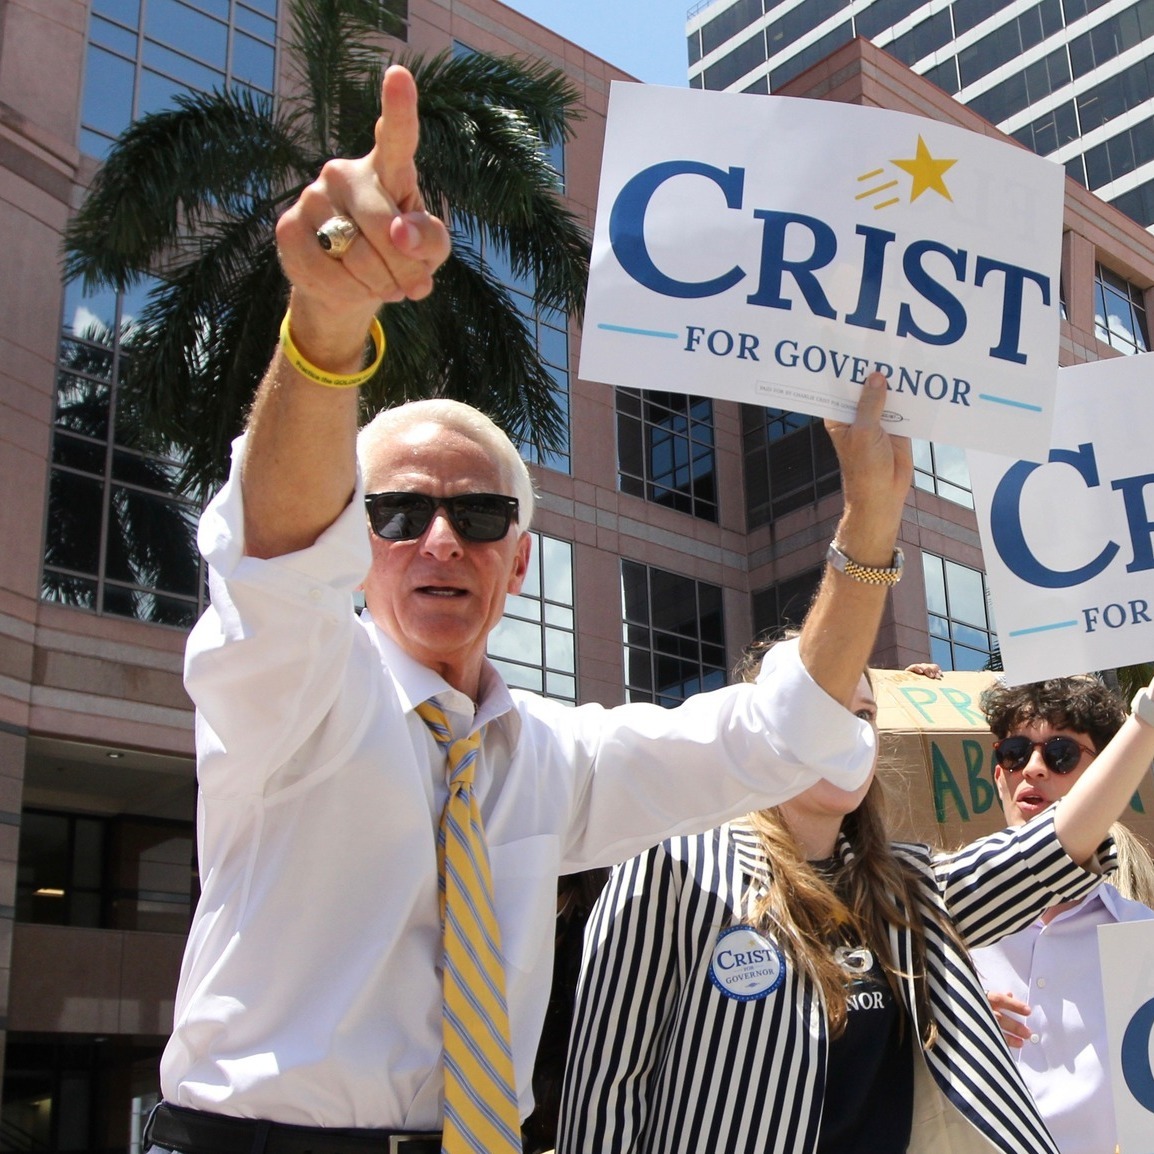 Private Equity, Crist